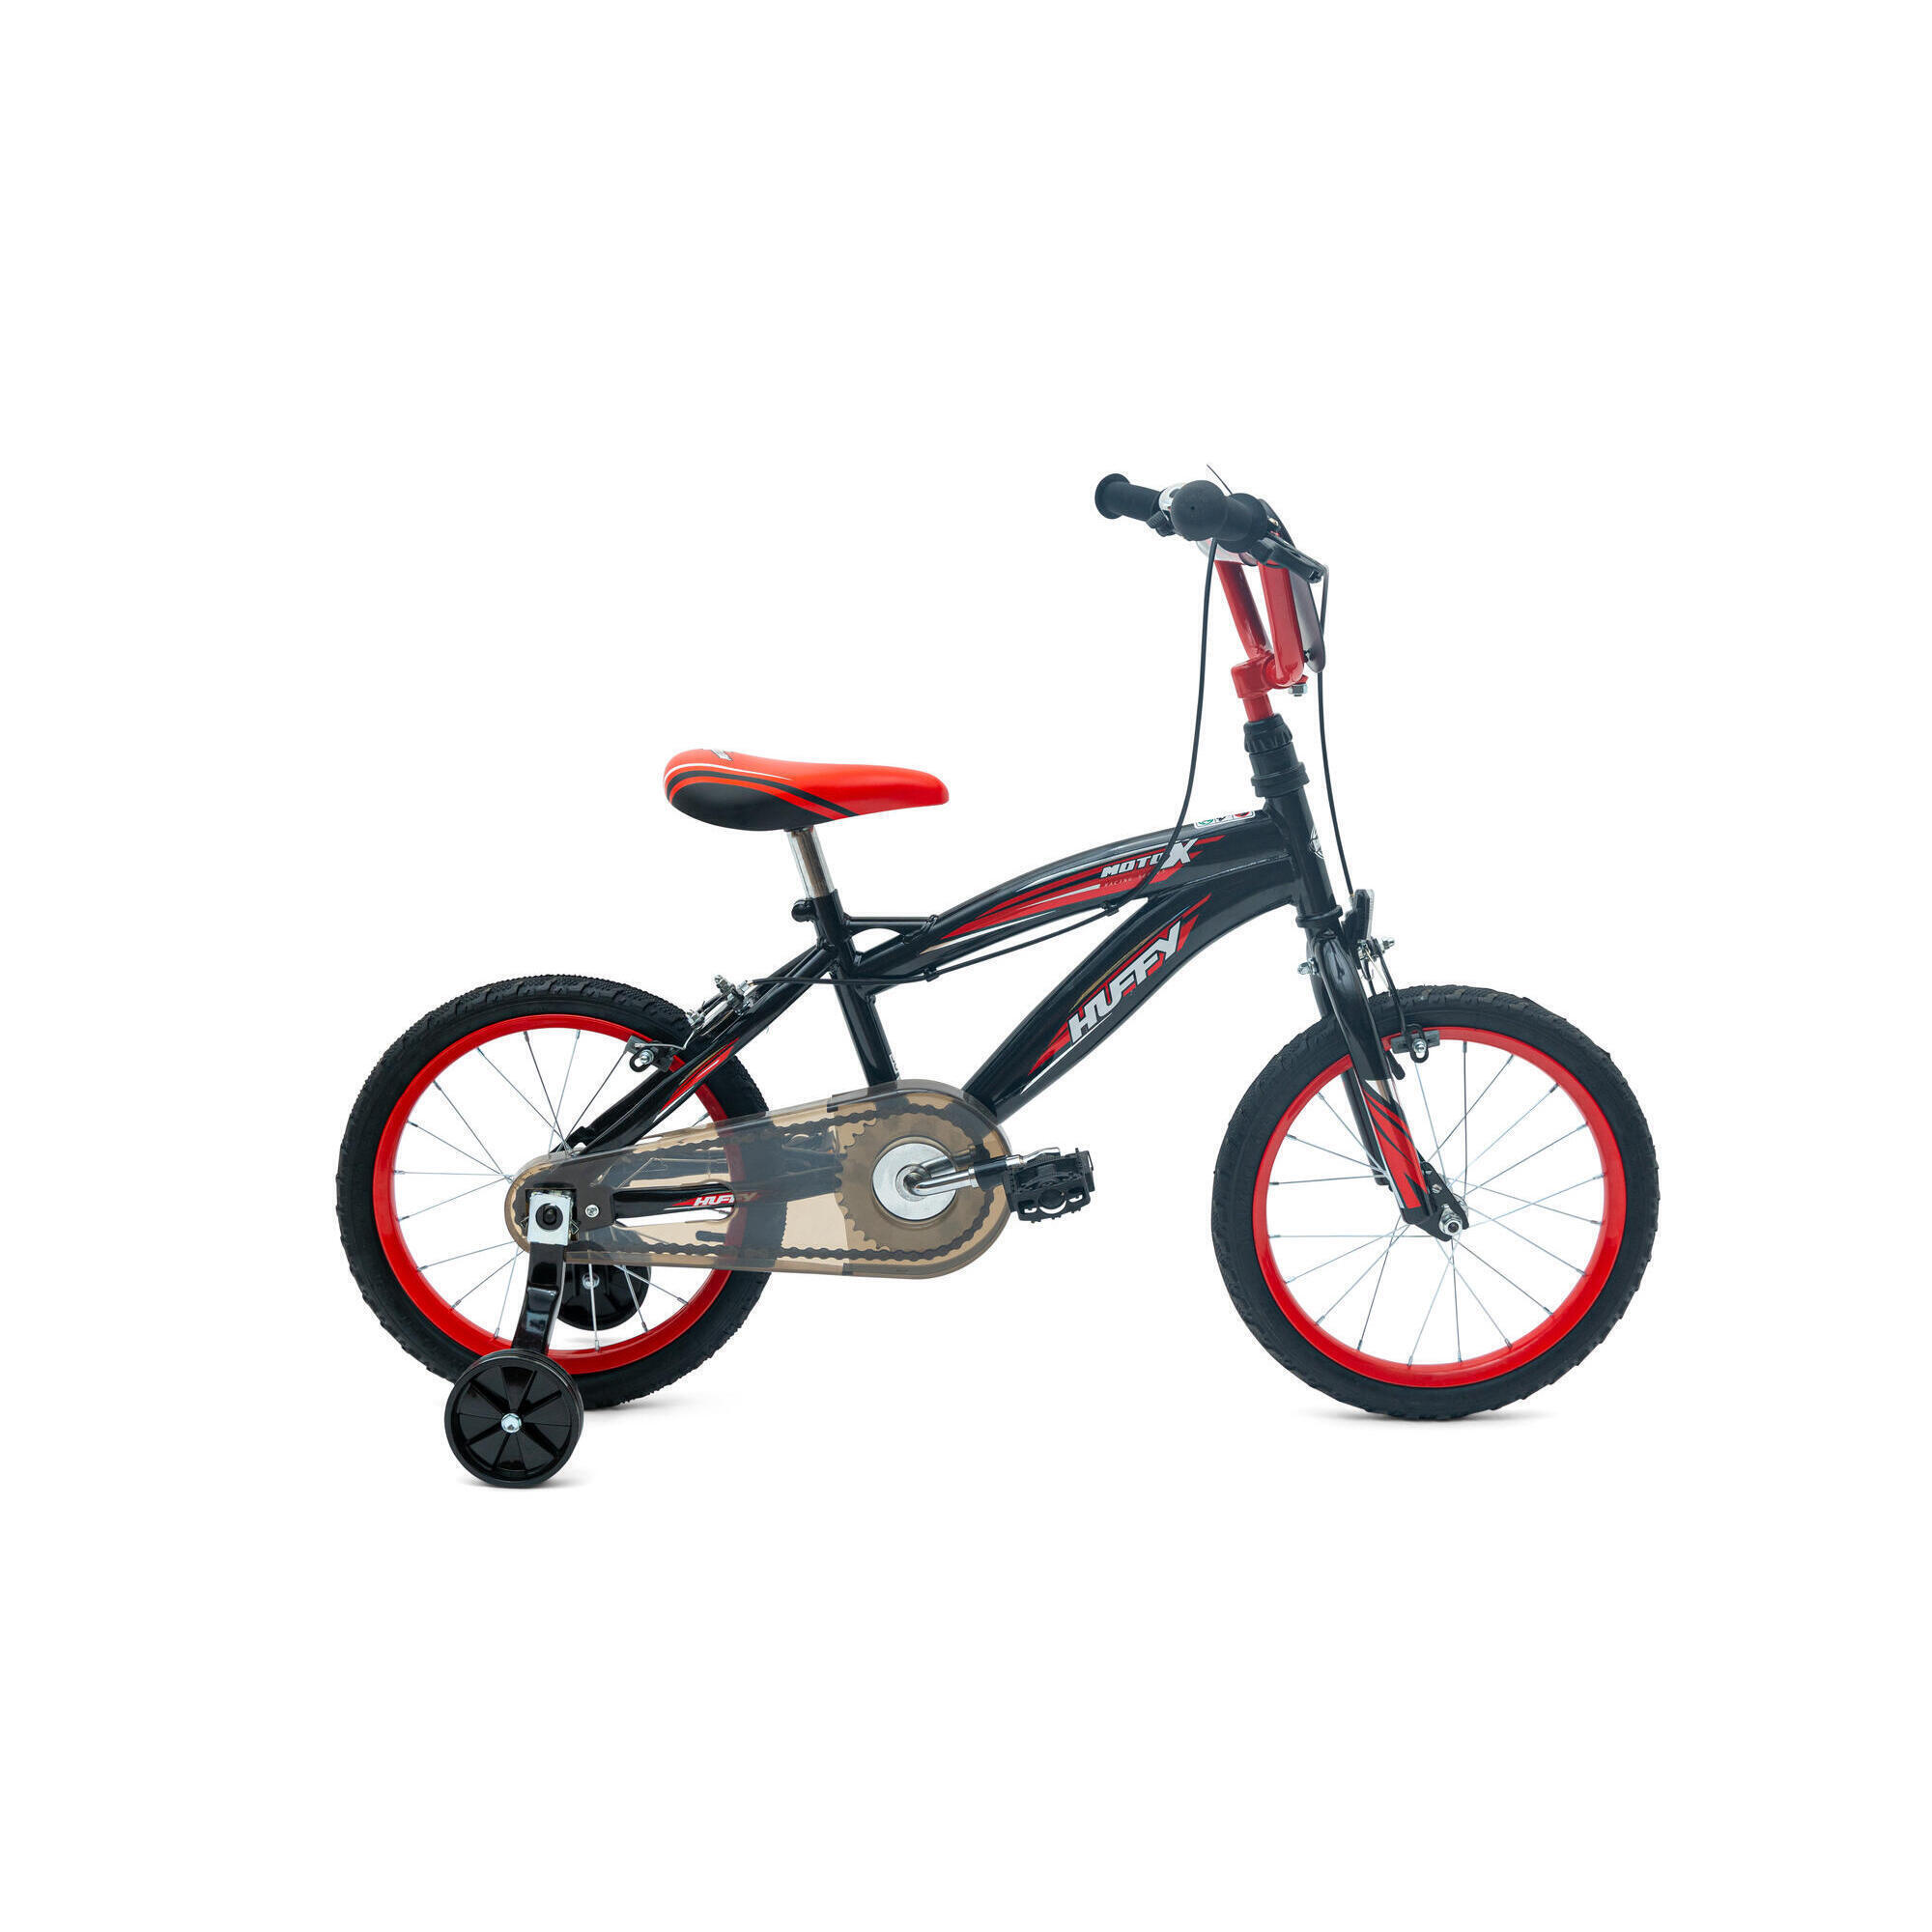 Huffy Moto X 16 Inch Boys Bike 5-7 Years + Quick Connect Assembly 2/7